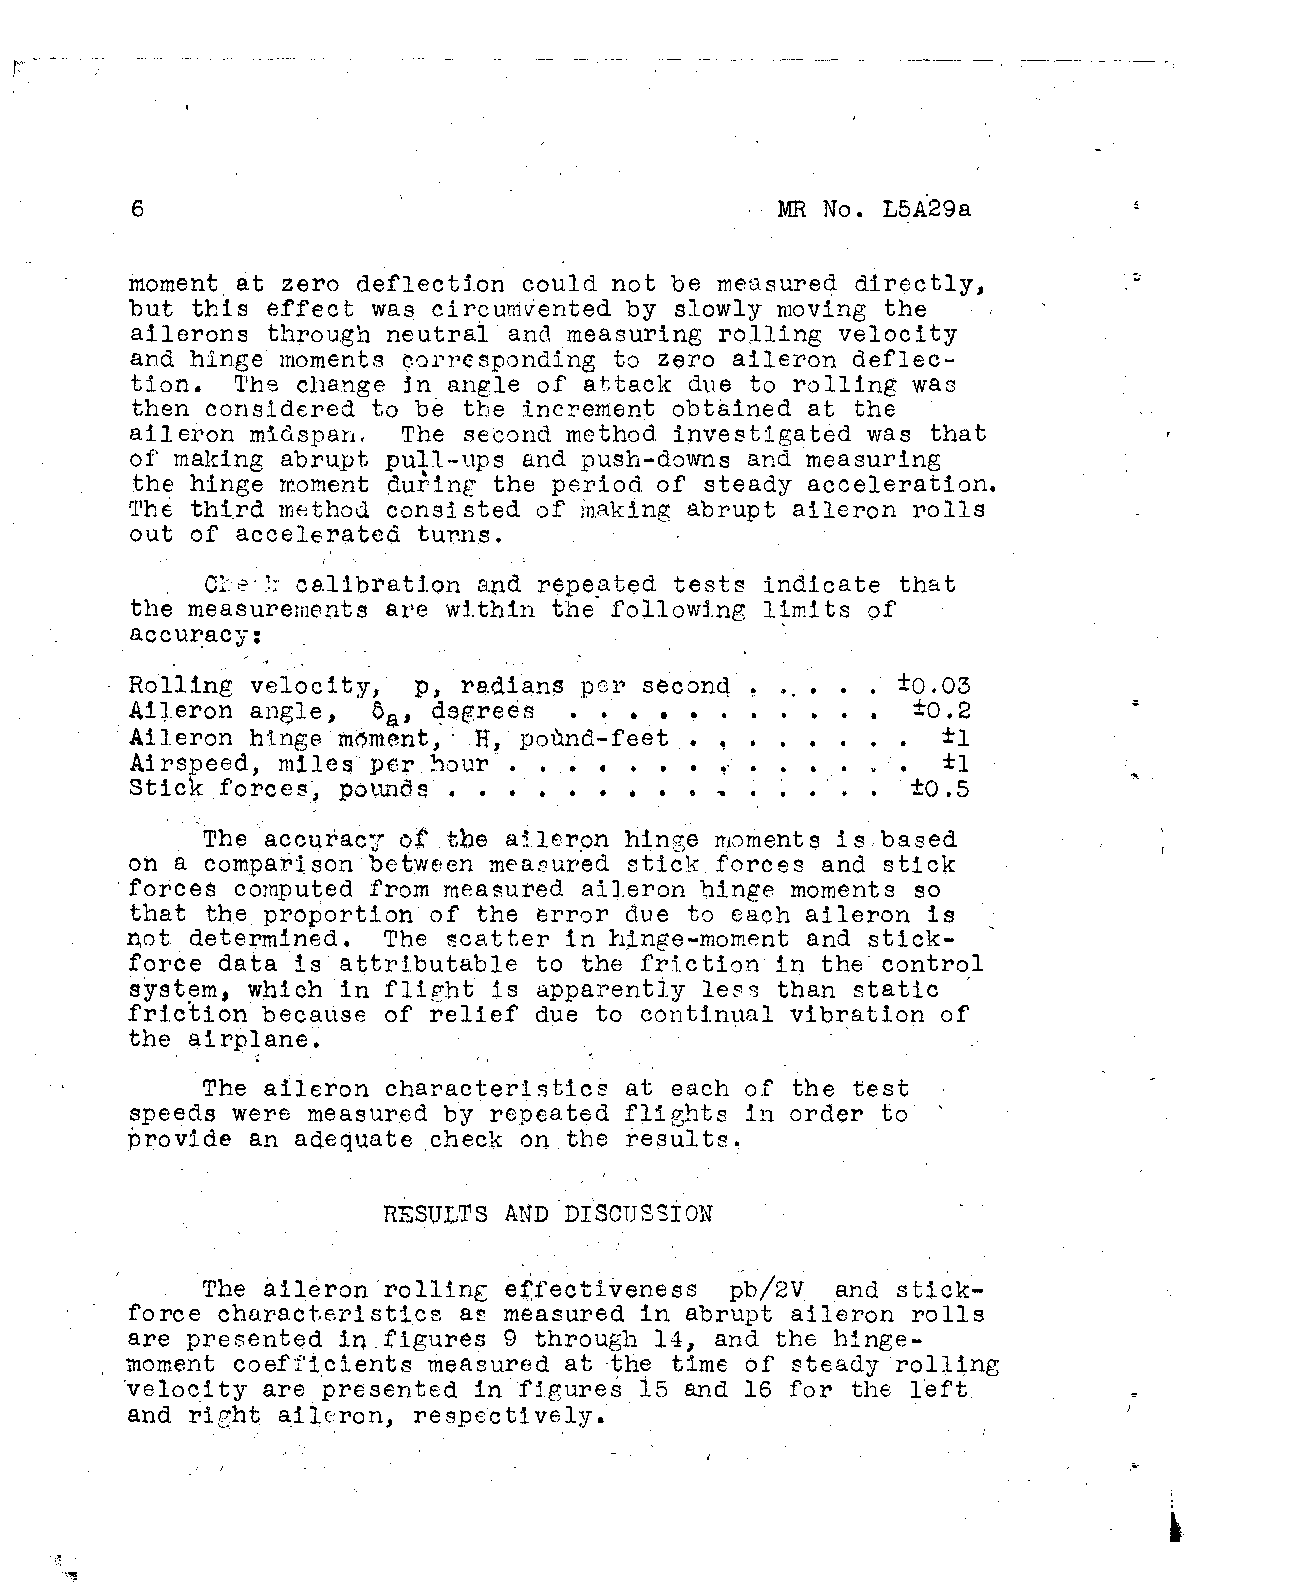 Sample page 7 from AirCorps Library document: Wartime Report for the Measurement of Aileron Hinge Moments and Aileron Control Characteristics of the P-40F